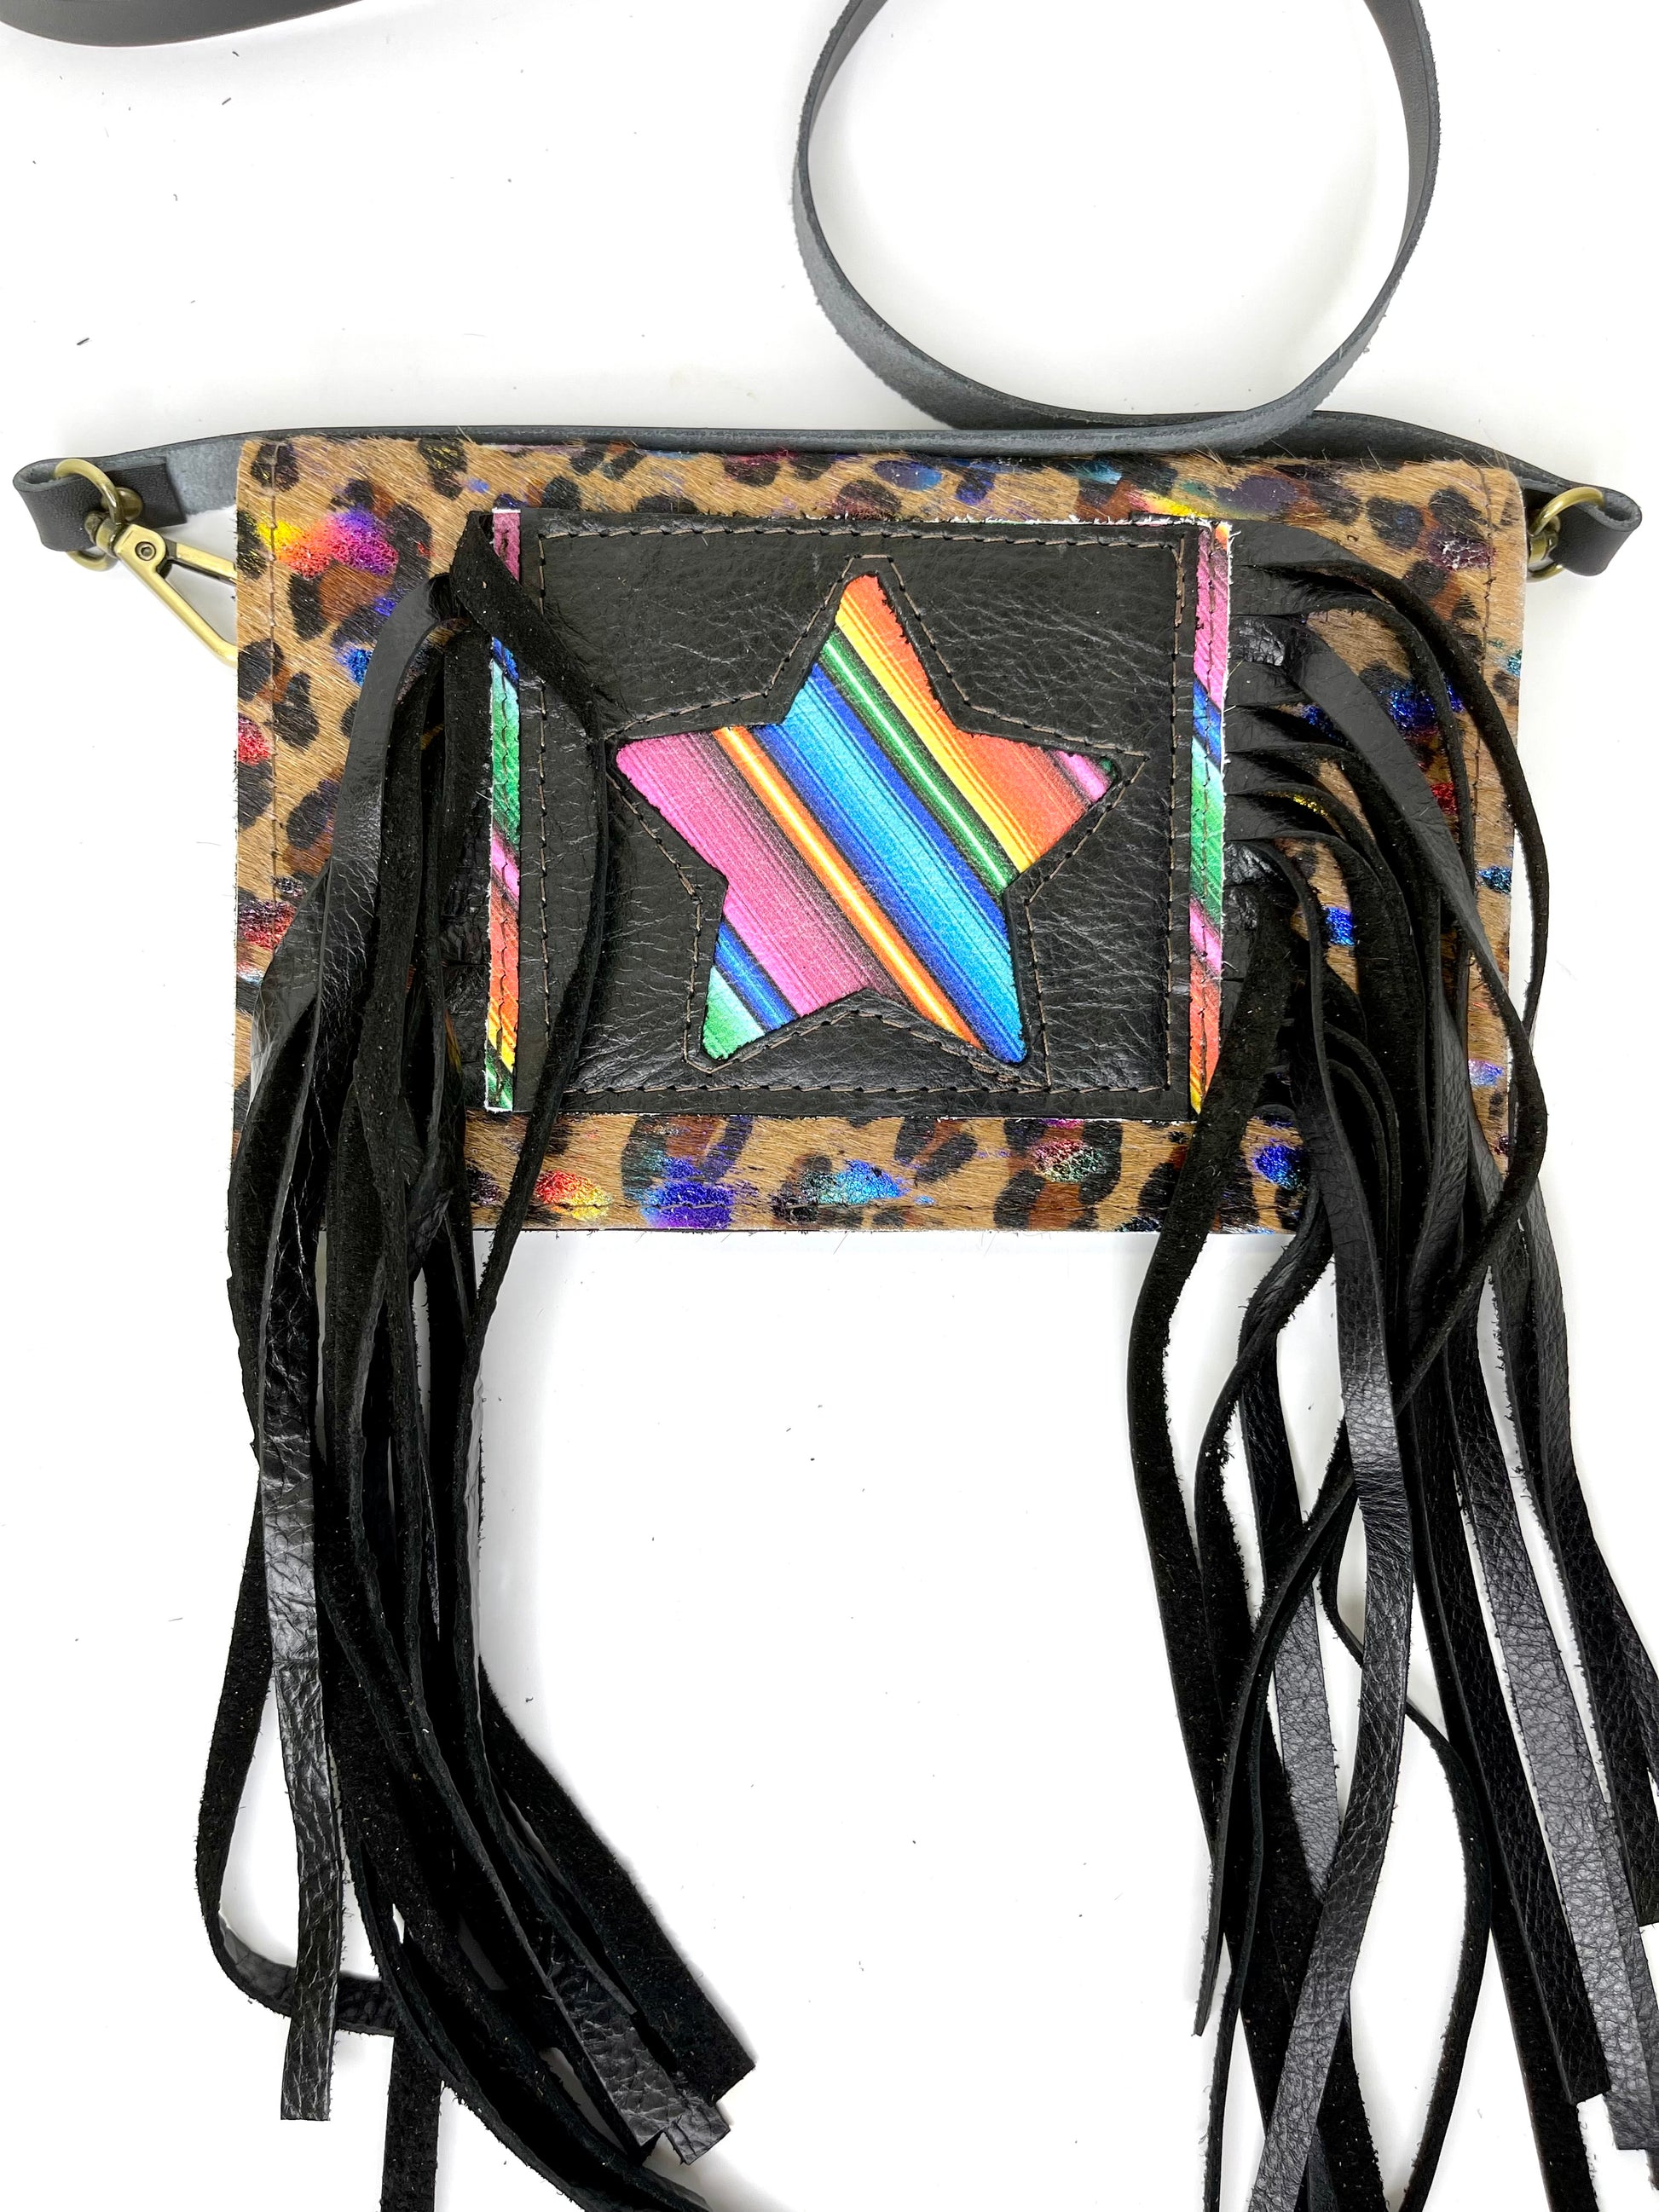 Small Crossbody star Lisa frank - Patches Of Upcycling